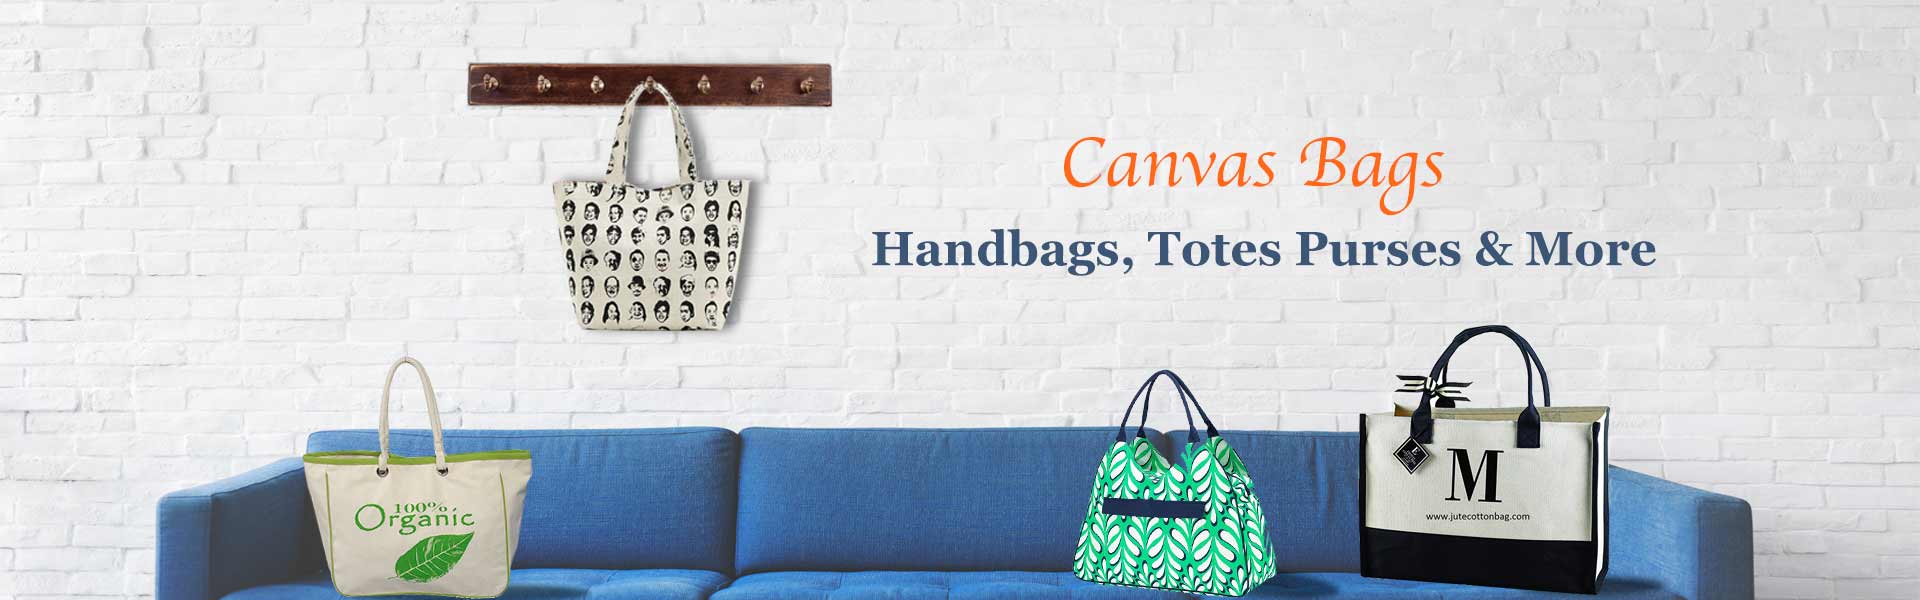 Wholesale Canvas Bags Supplier in New Zealand